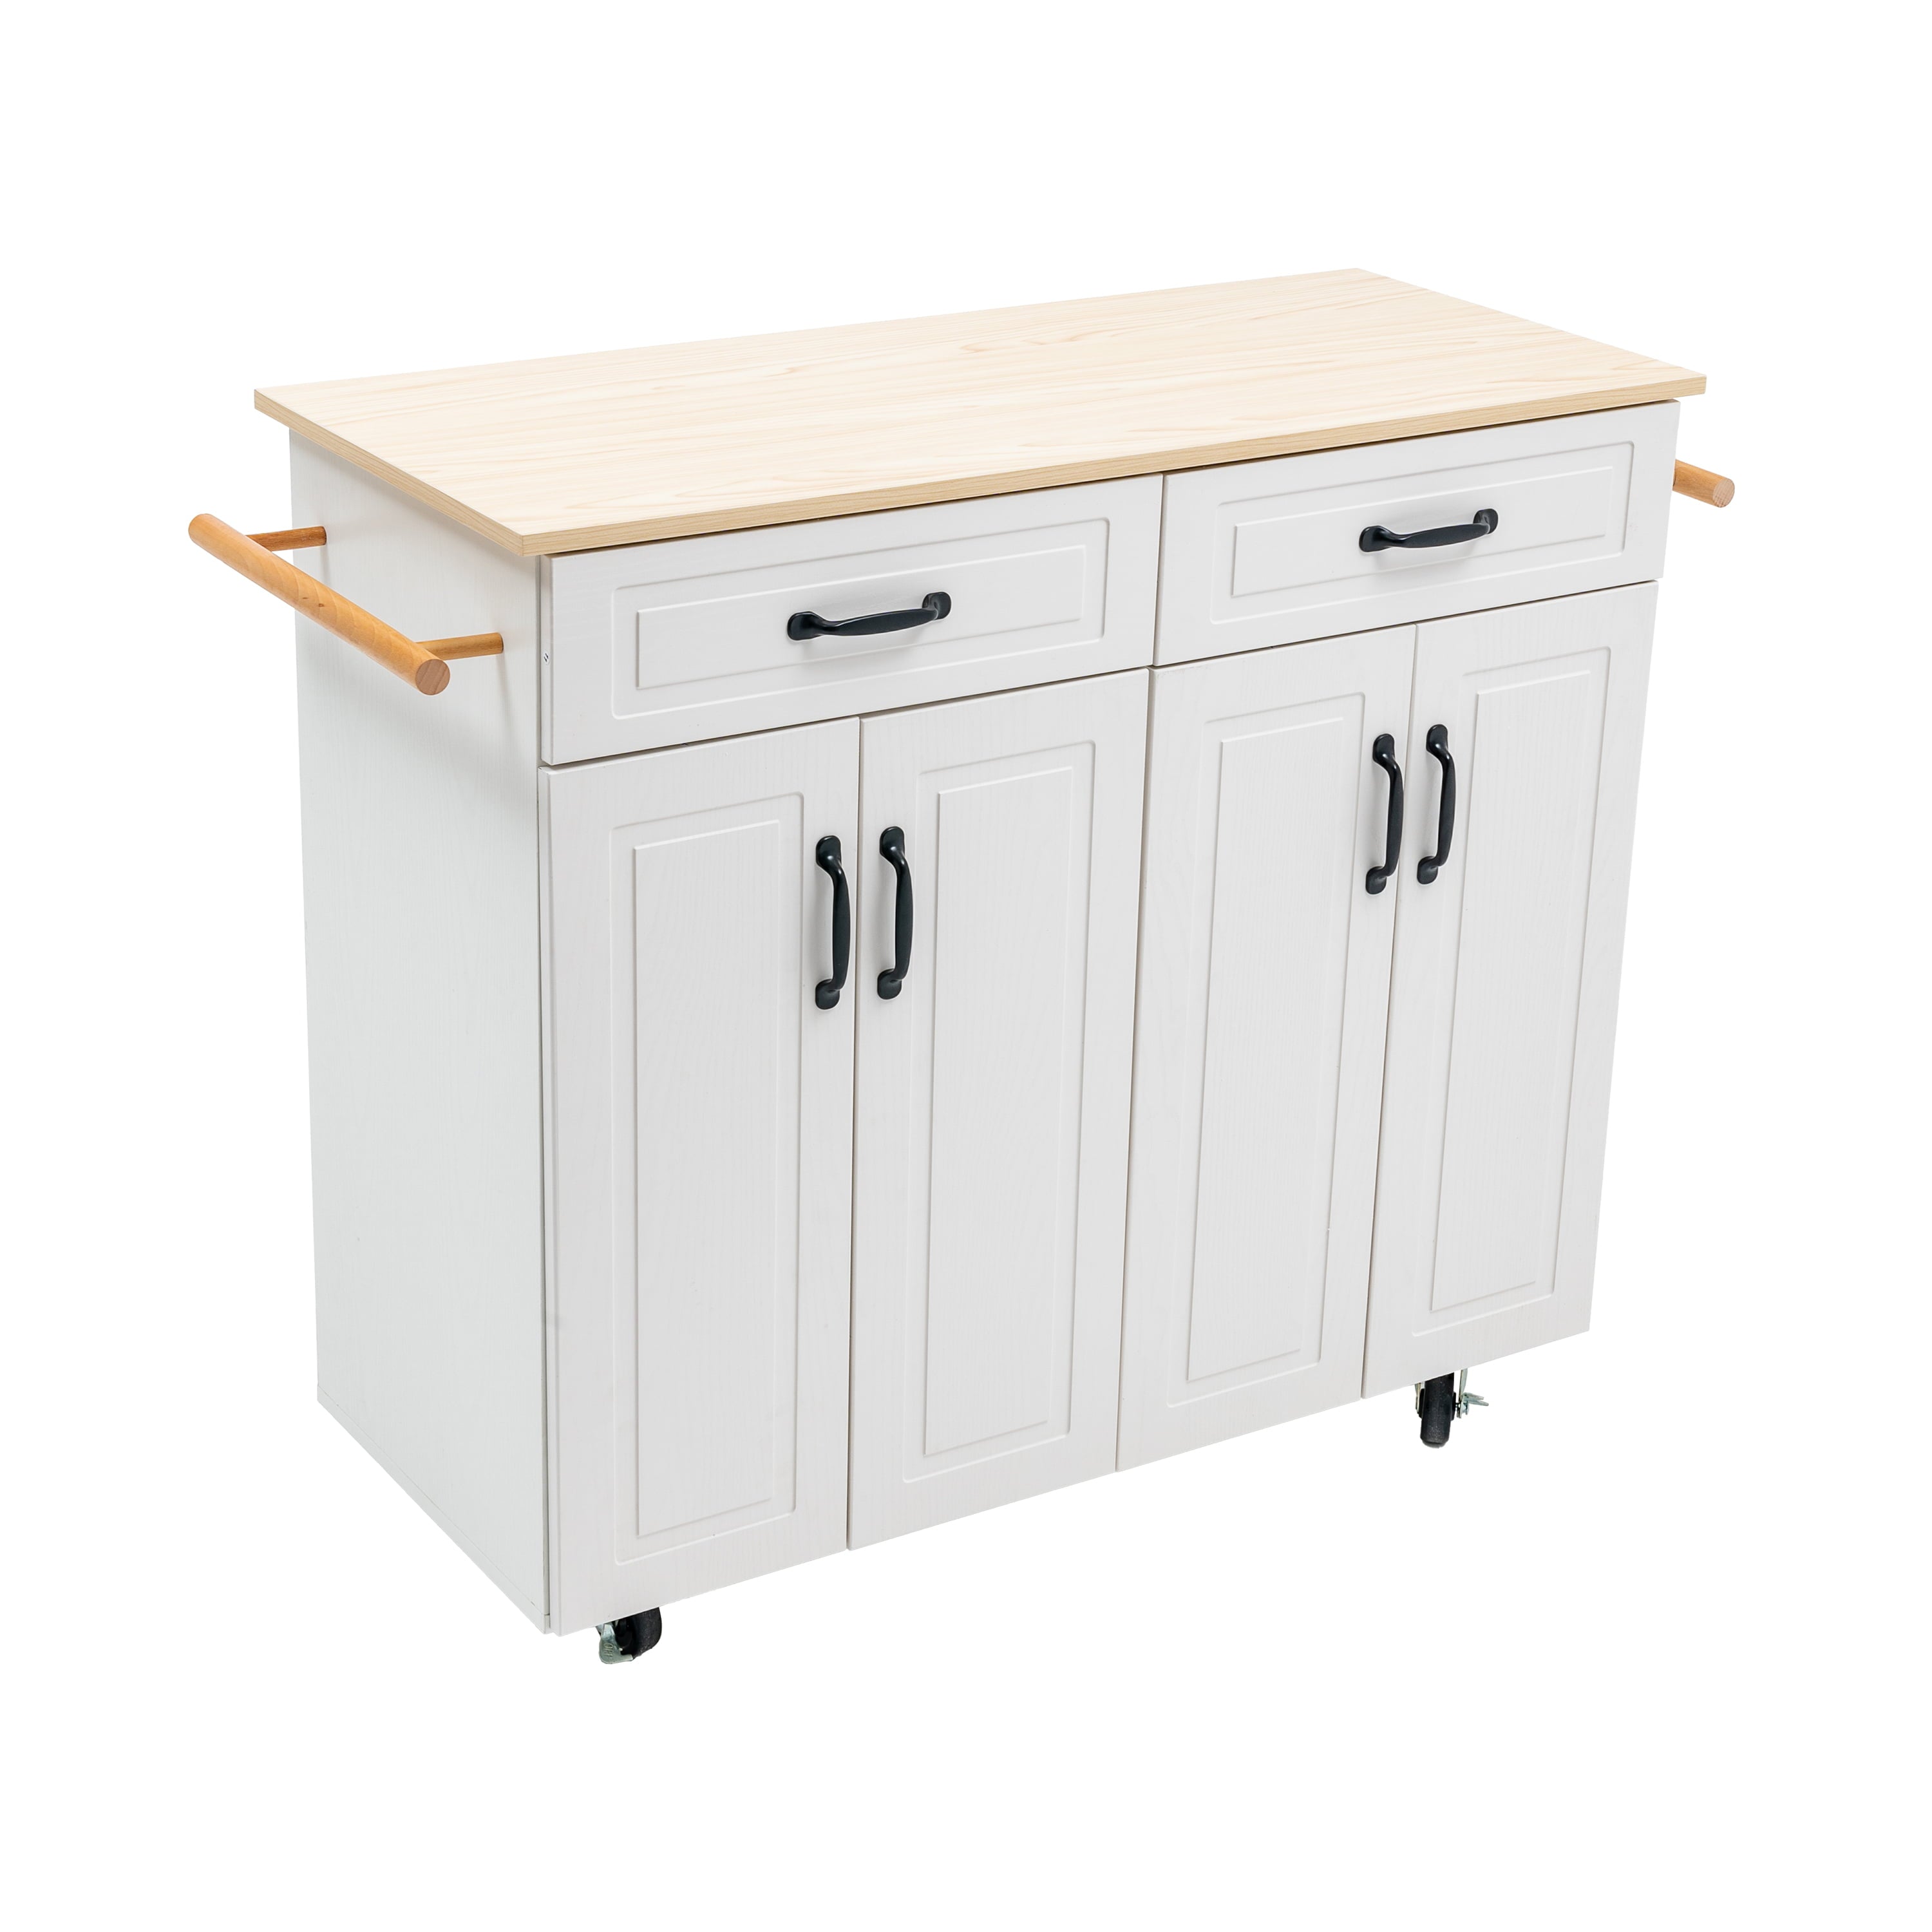 Prime Garden Kitchen Island Cart on Wheels with Drawer and Storage Shelves， White